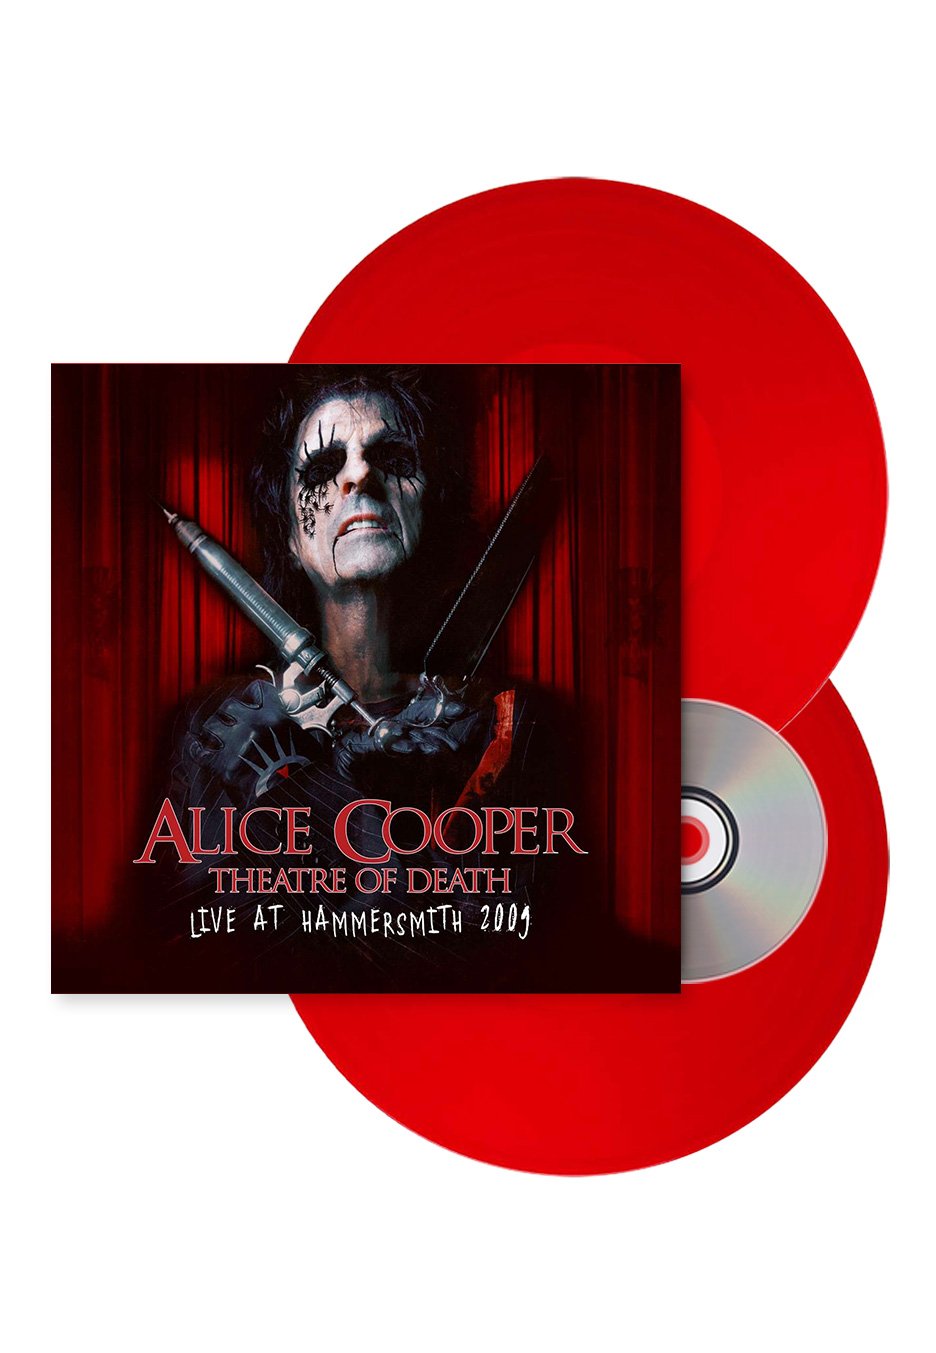 Alice Cooper - Theatre Of Death (Live At Hammersmith 2009) Ltd. Red - Colored 2 Vinyl + DVD